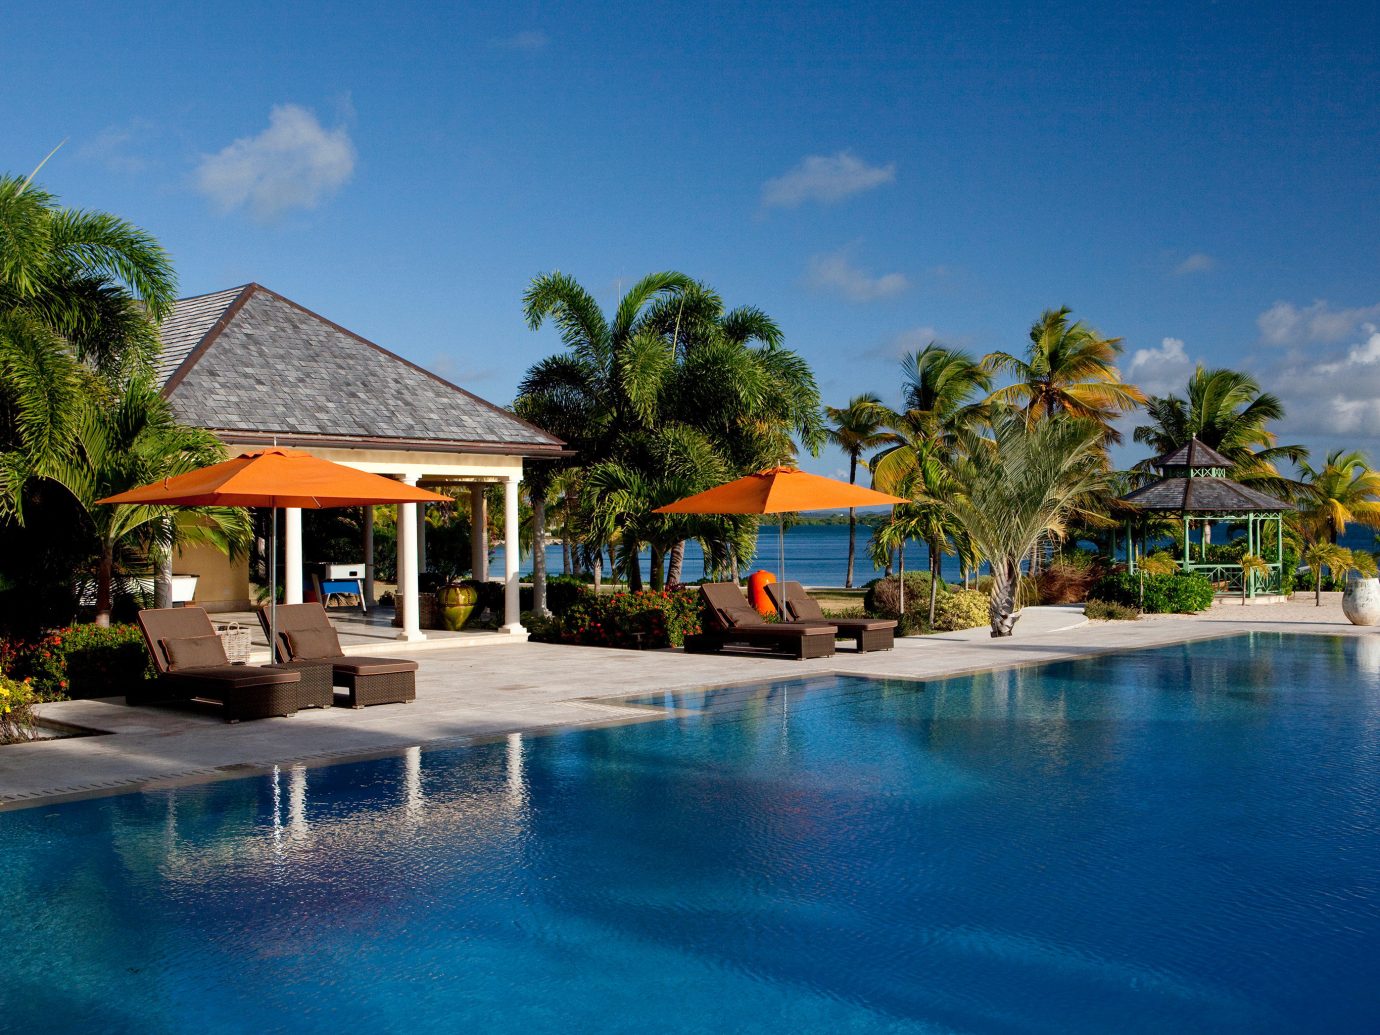 The 8 BEST Luxury Hotels in the Caribbean Worth the Splurge